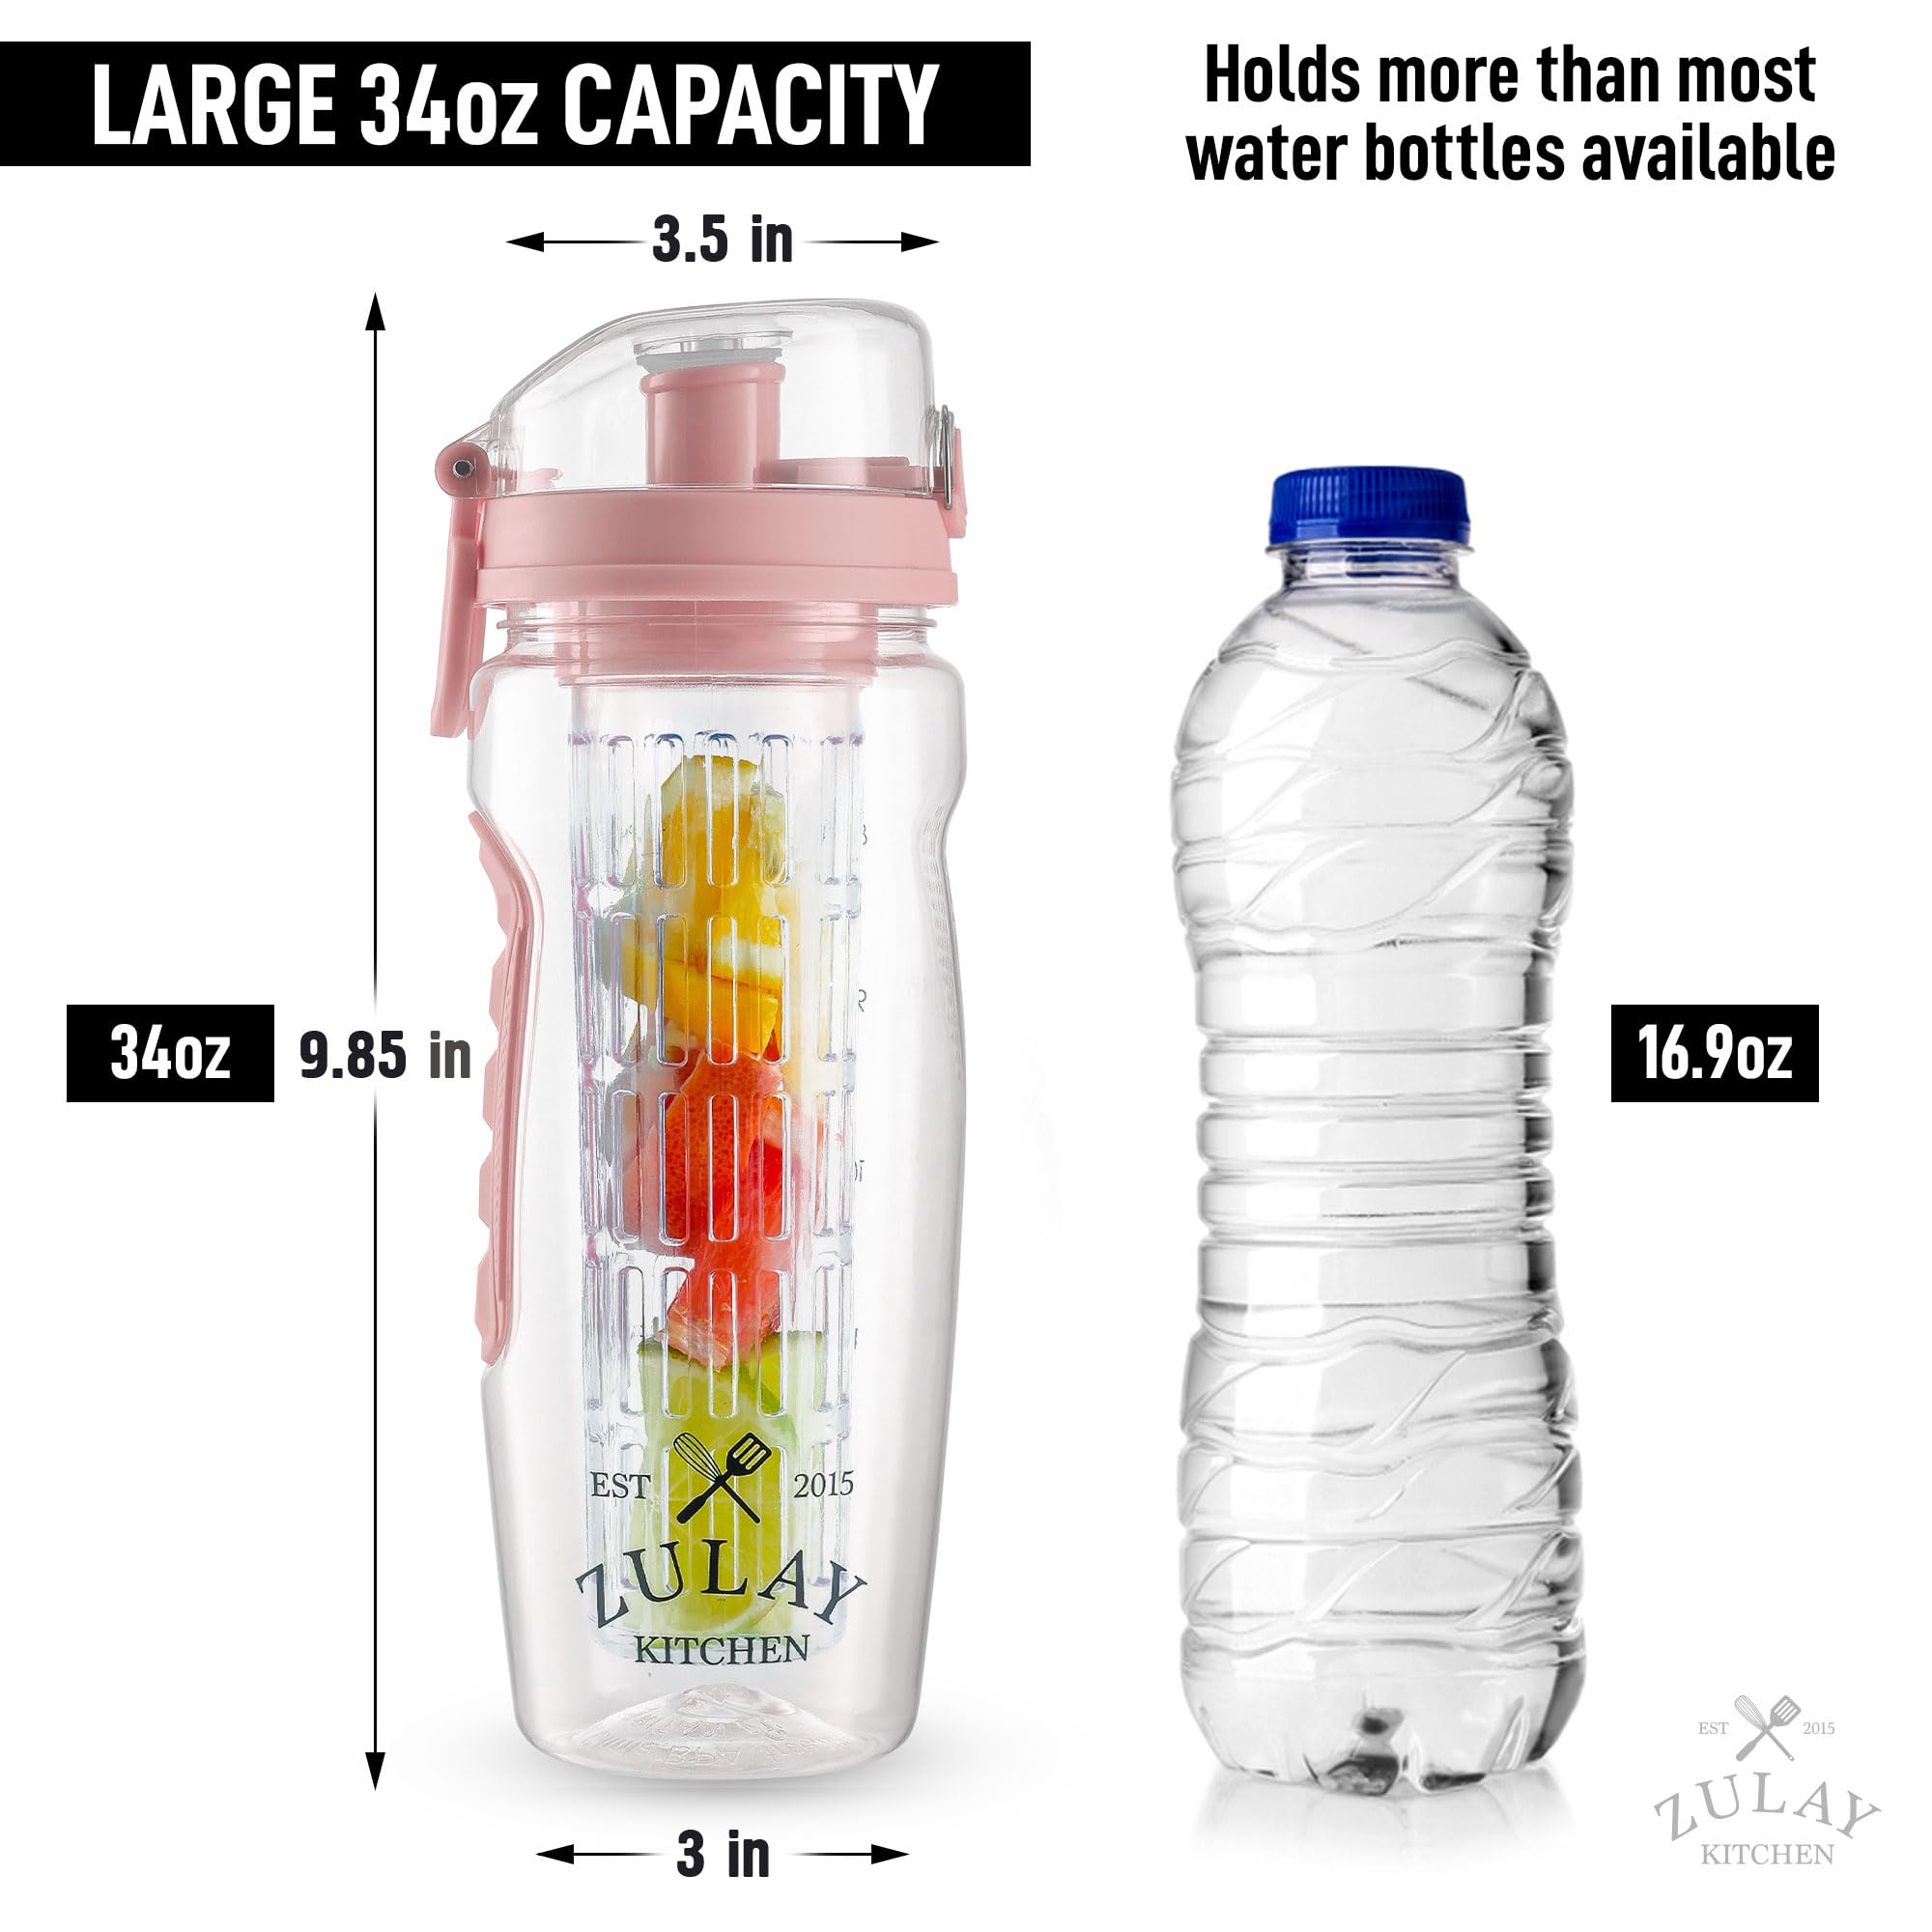 Zulay 34 oz Large, Leakproof Fruit Infuser Water Bottle With Sleeve And Anti-Slip Grip - Men and Women's Ideal Fitness Gift Or For Gym, Camping, and Travel - Cotton Candy Pink